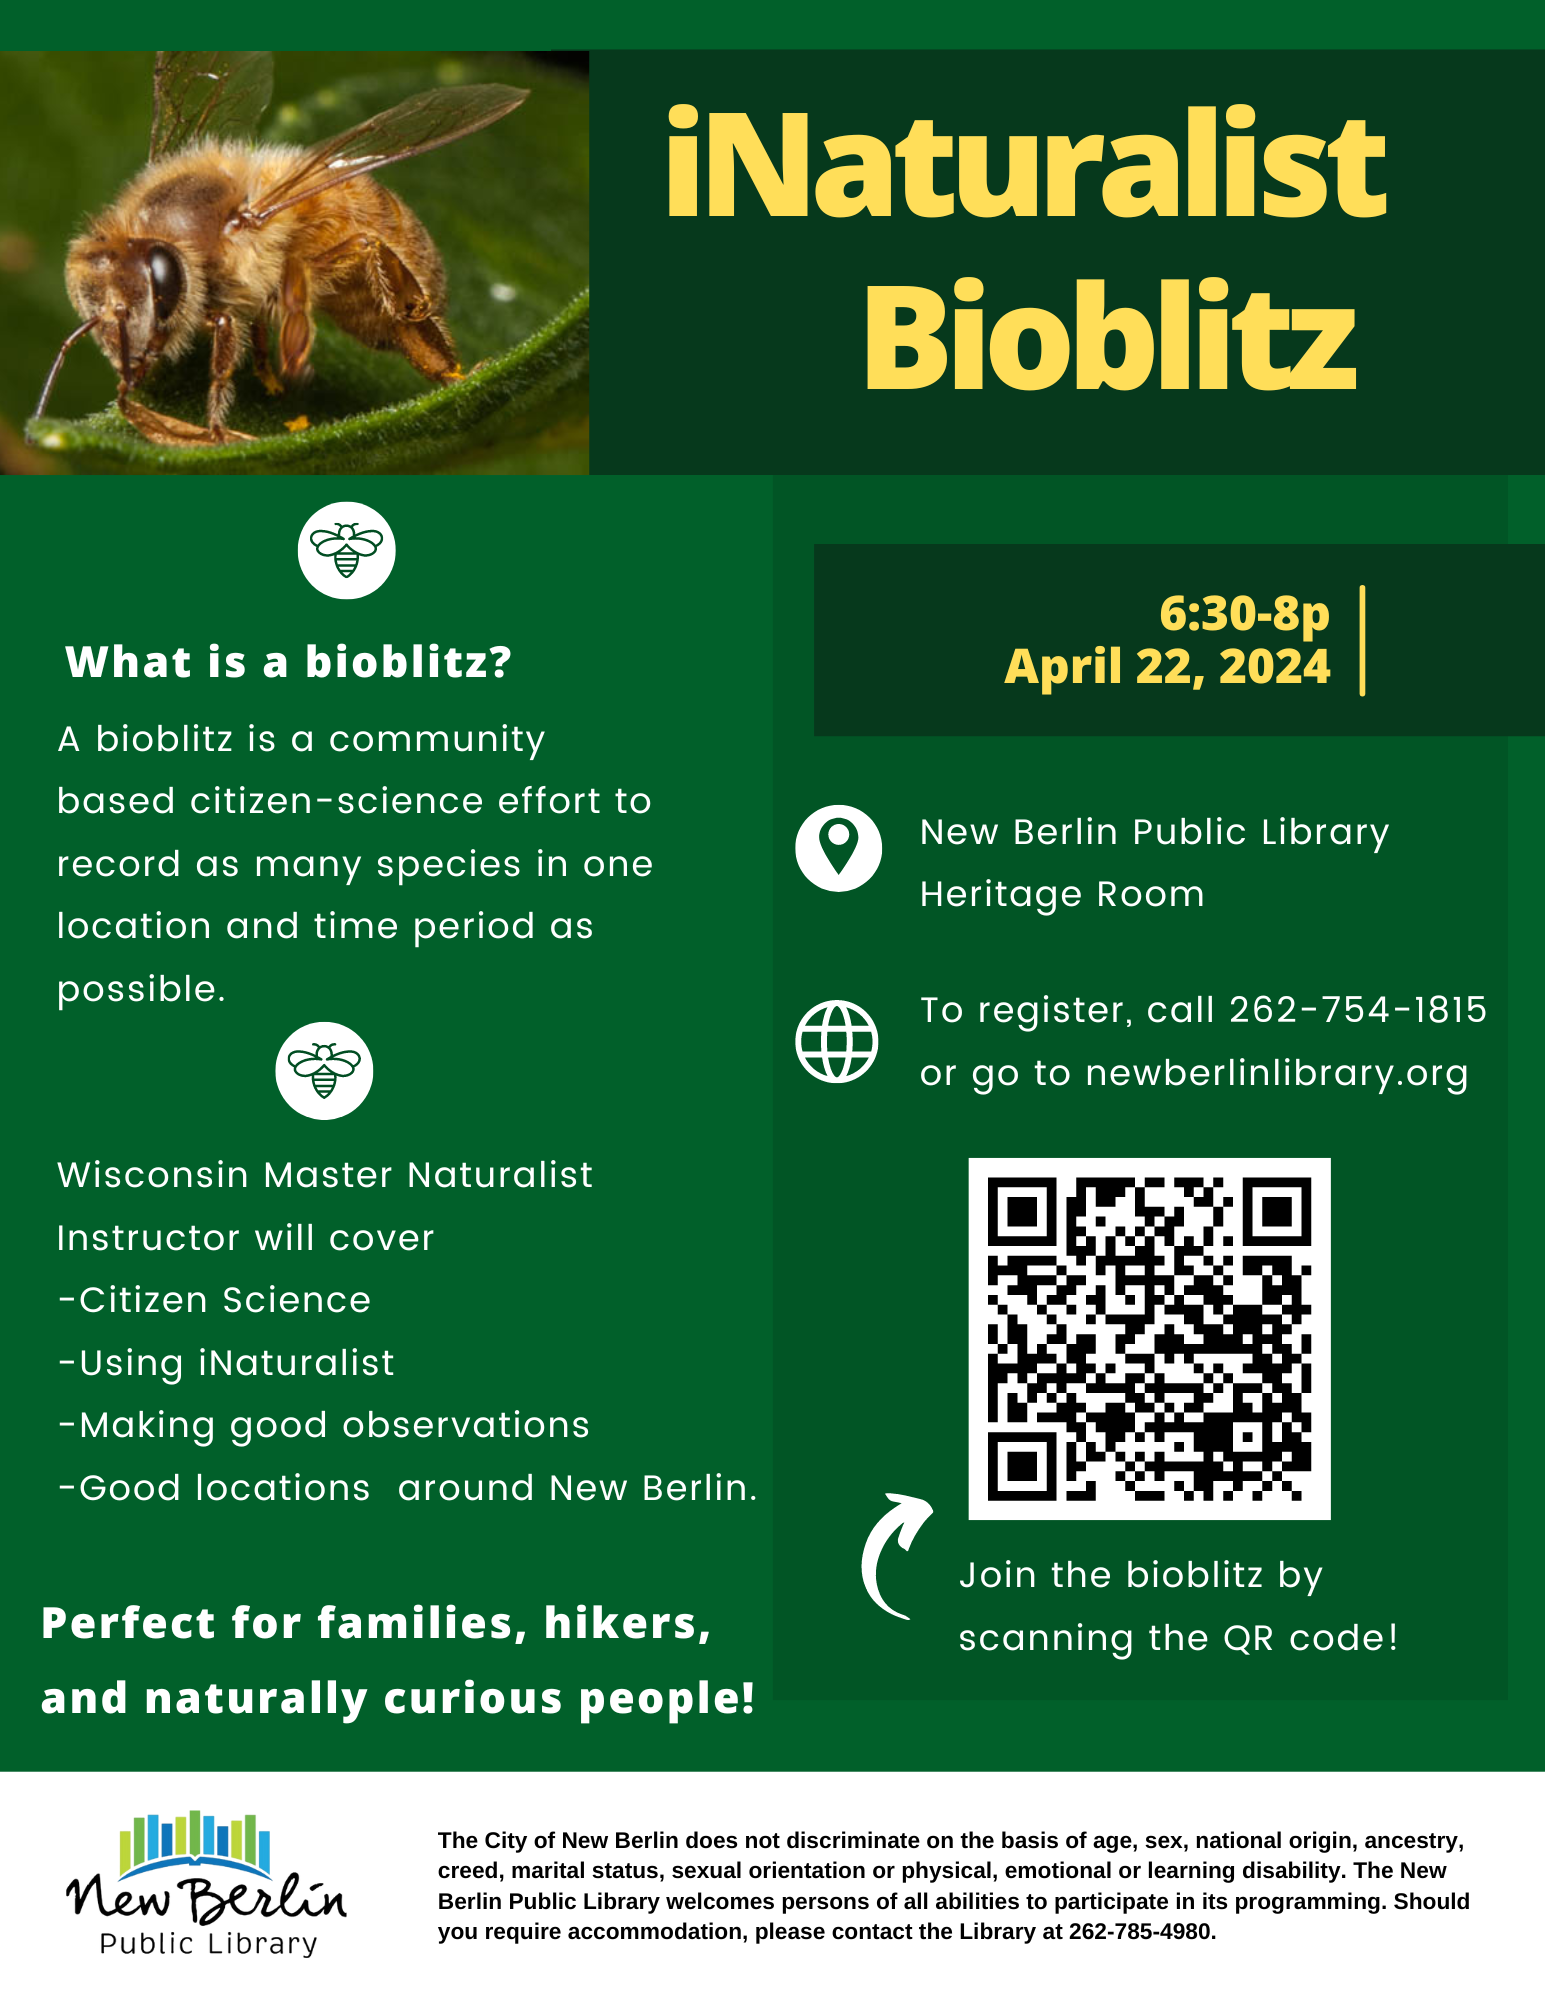 Image shows a native bee resting on a plant, along with the information about the event. All information can be found in description of event. 